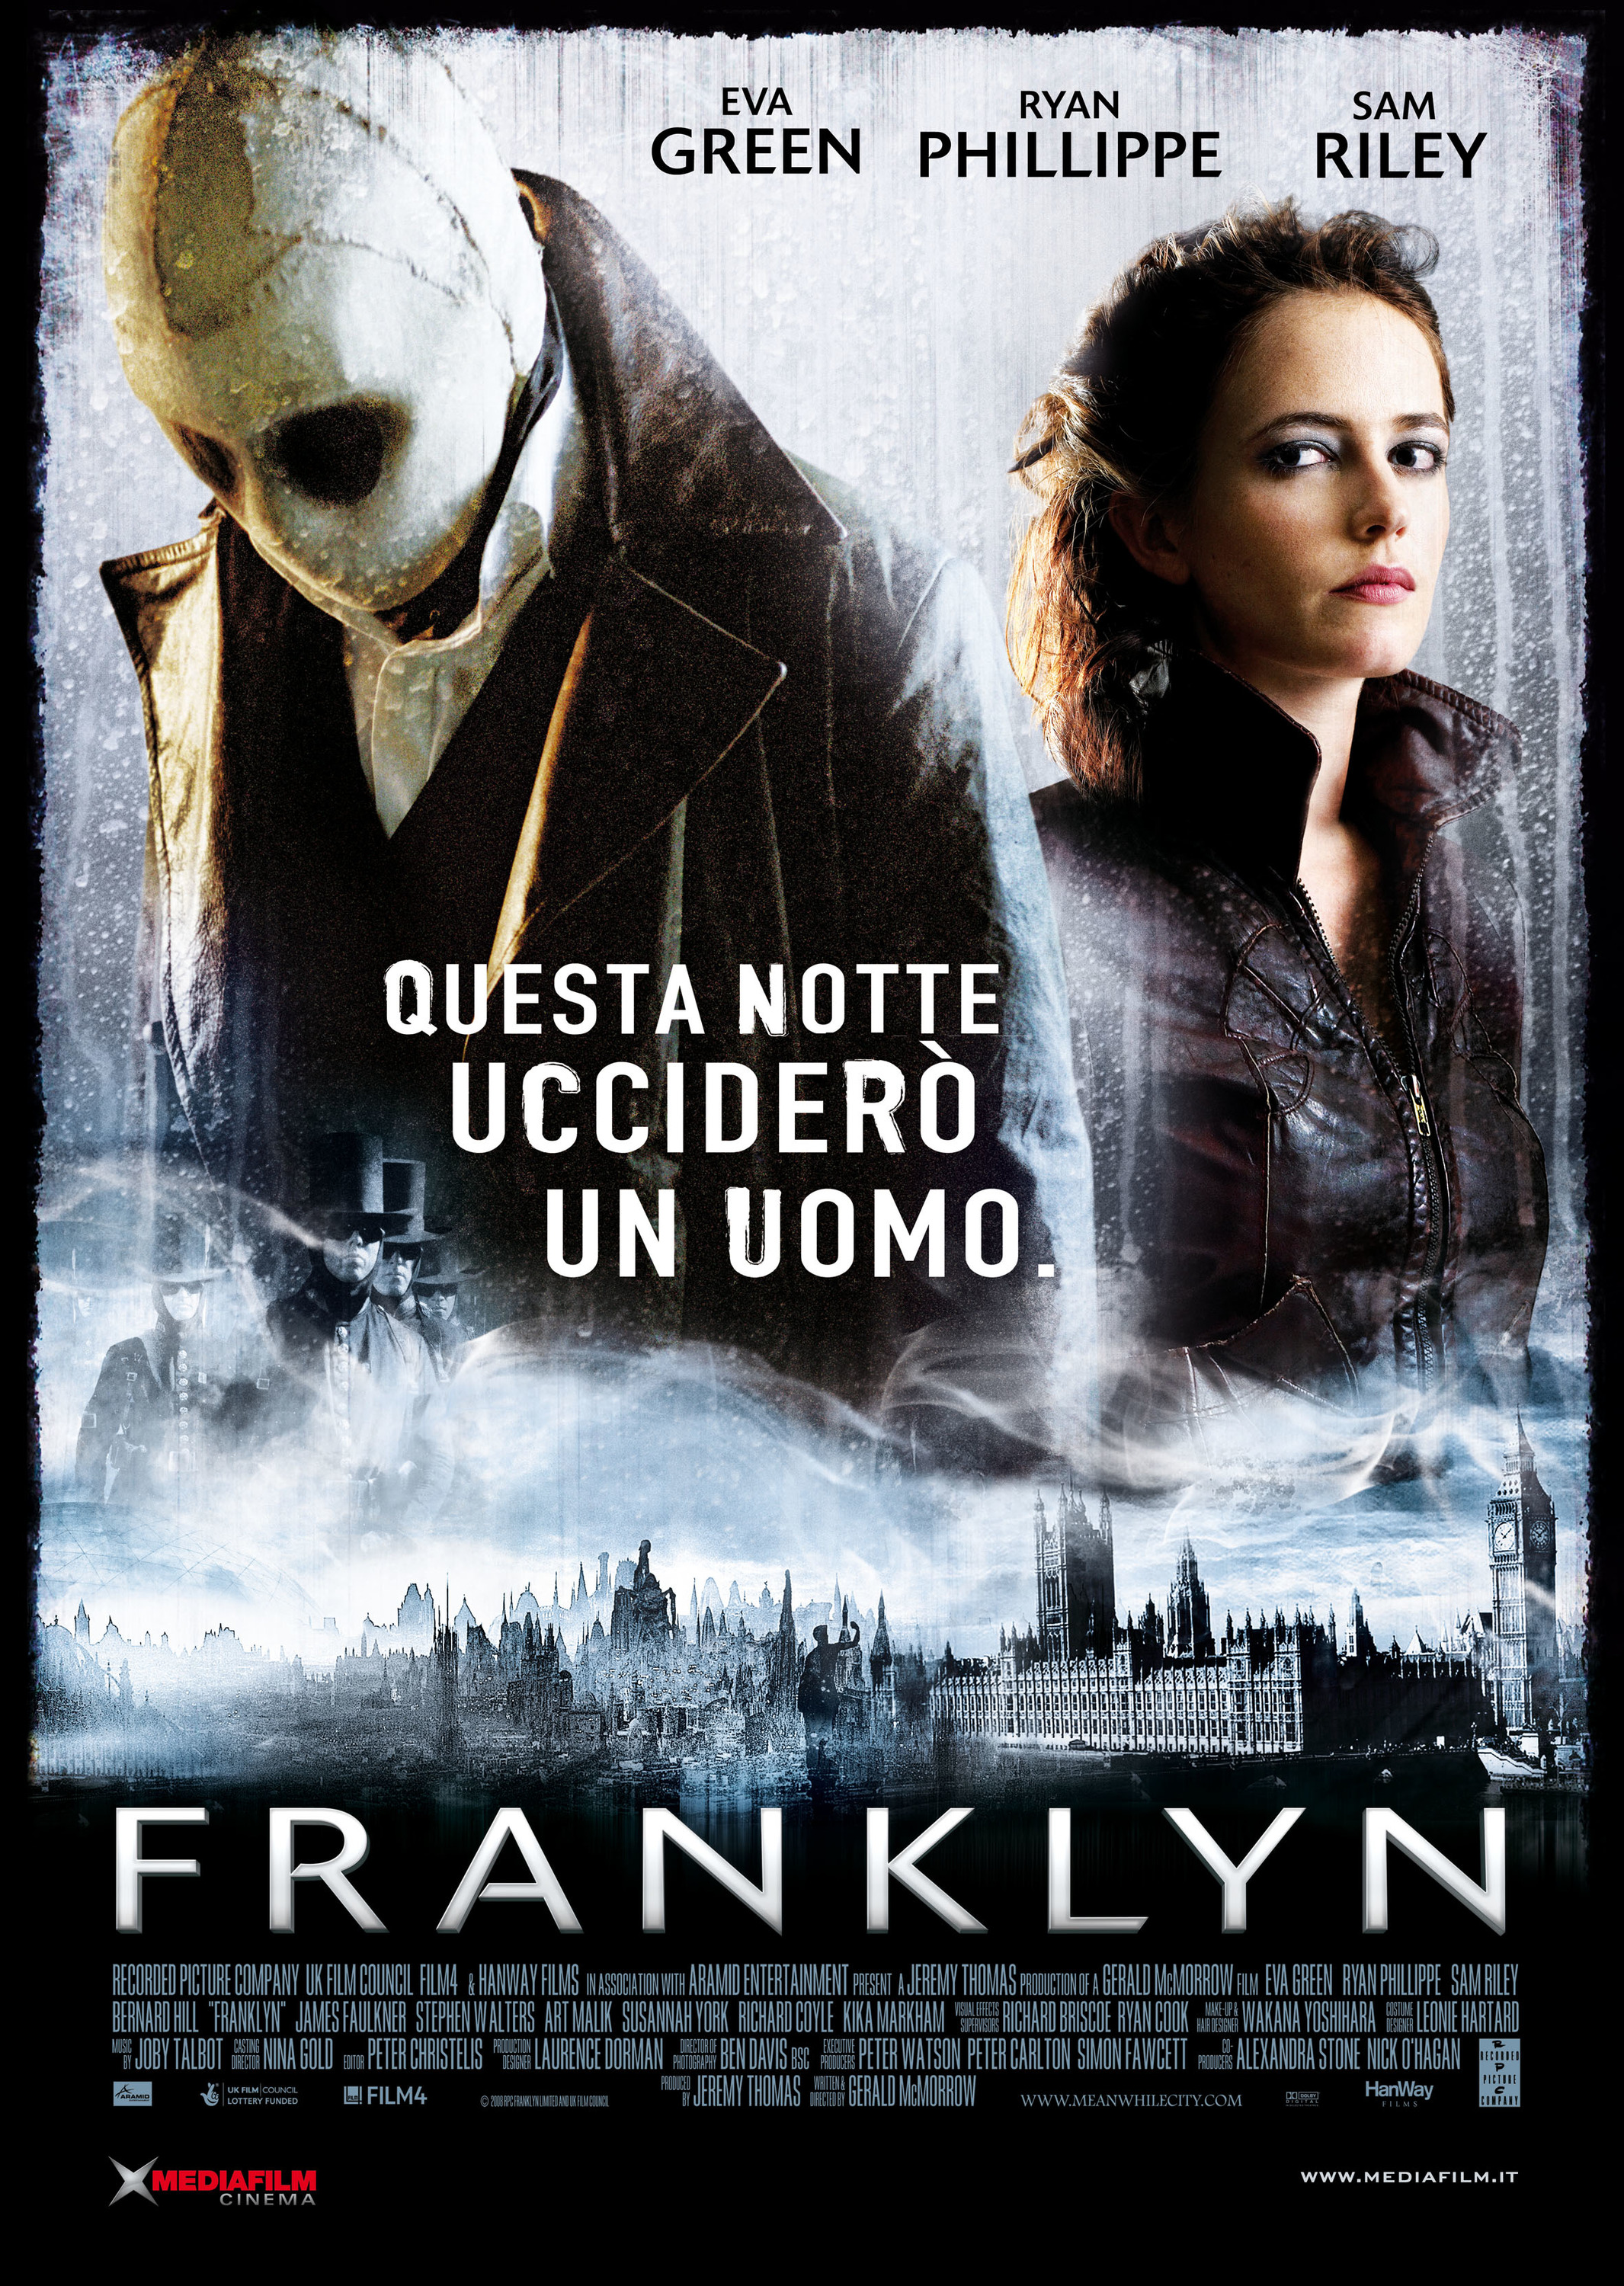 Mega Sized Movie Poster Image for Franklyn (#6 of 6)